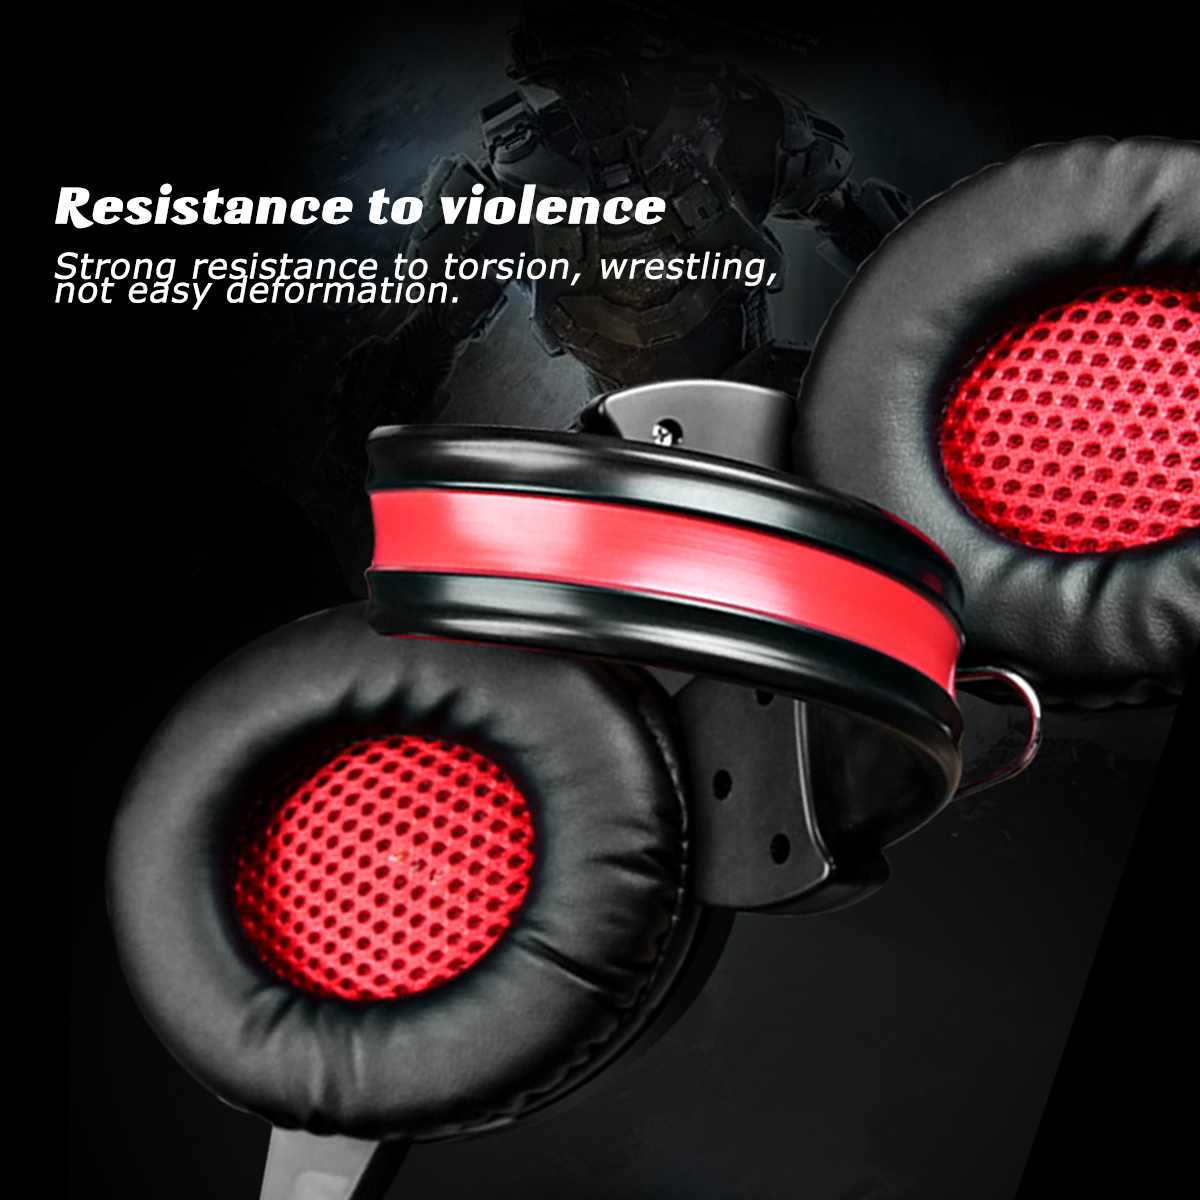 Bakeey-35mm-Super-Pass-Gaming-Headset-Stereo-LED-Colorful-Breathing-Lamp-Earphone-Hifi-Heavy-Bass-Ga-1593352-6